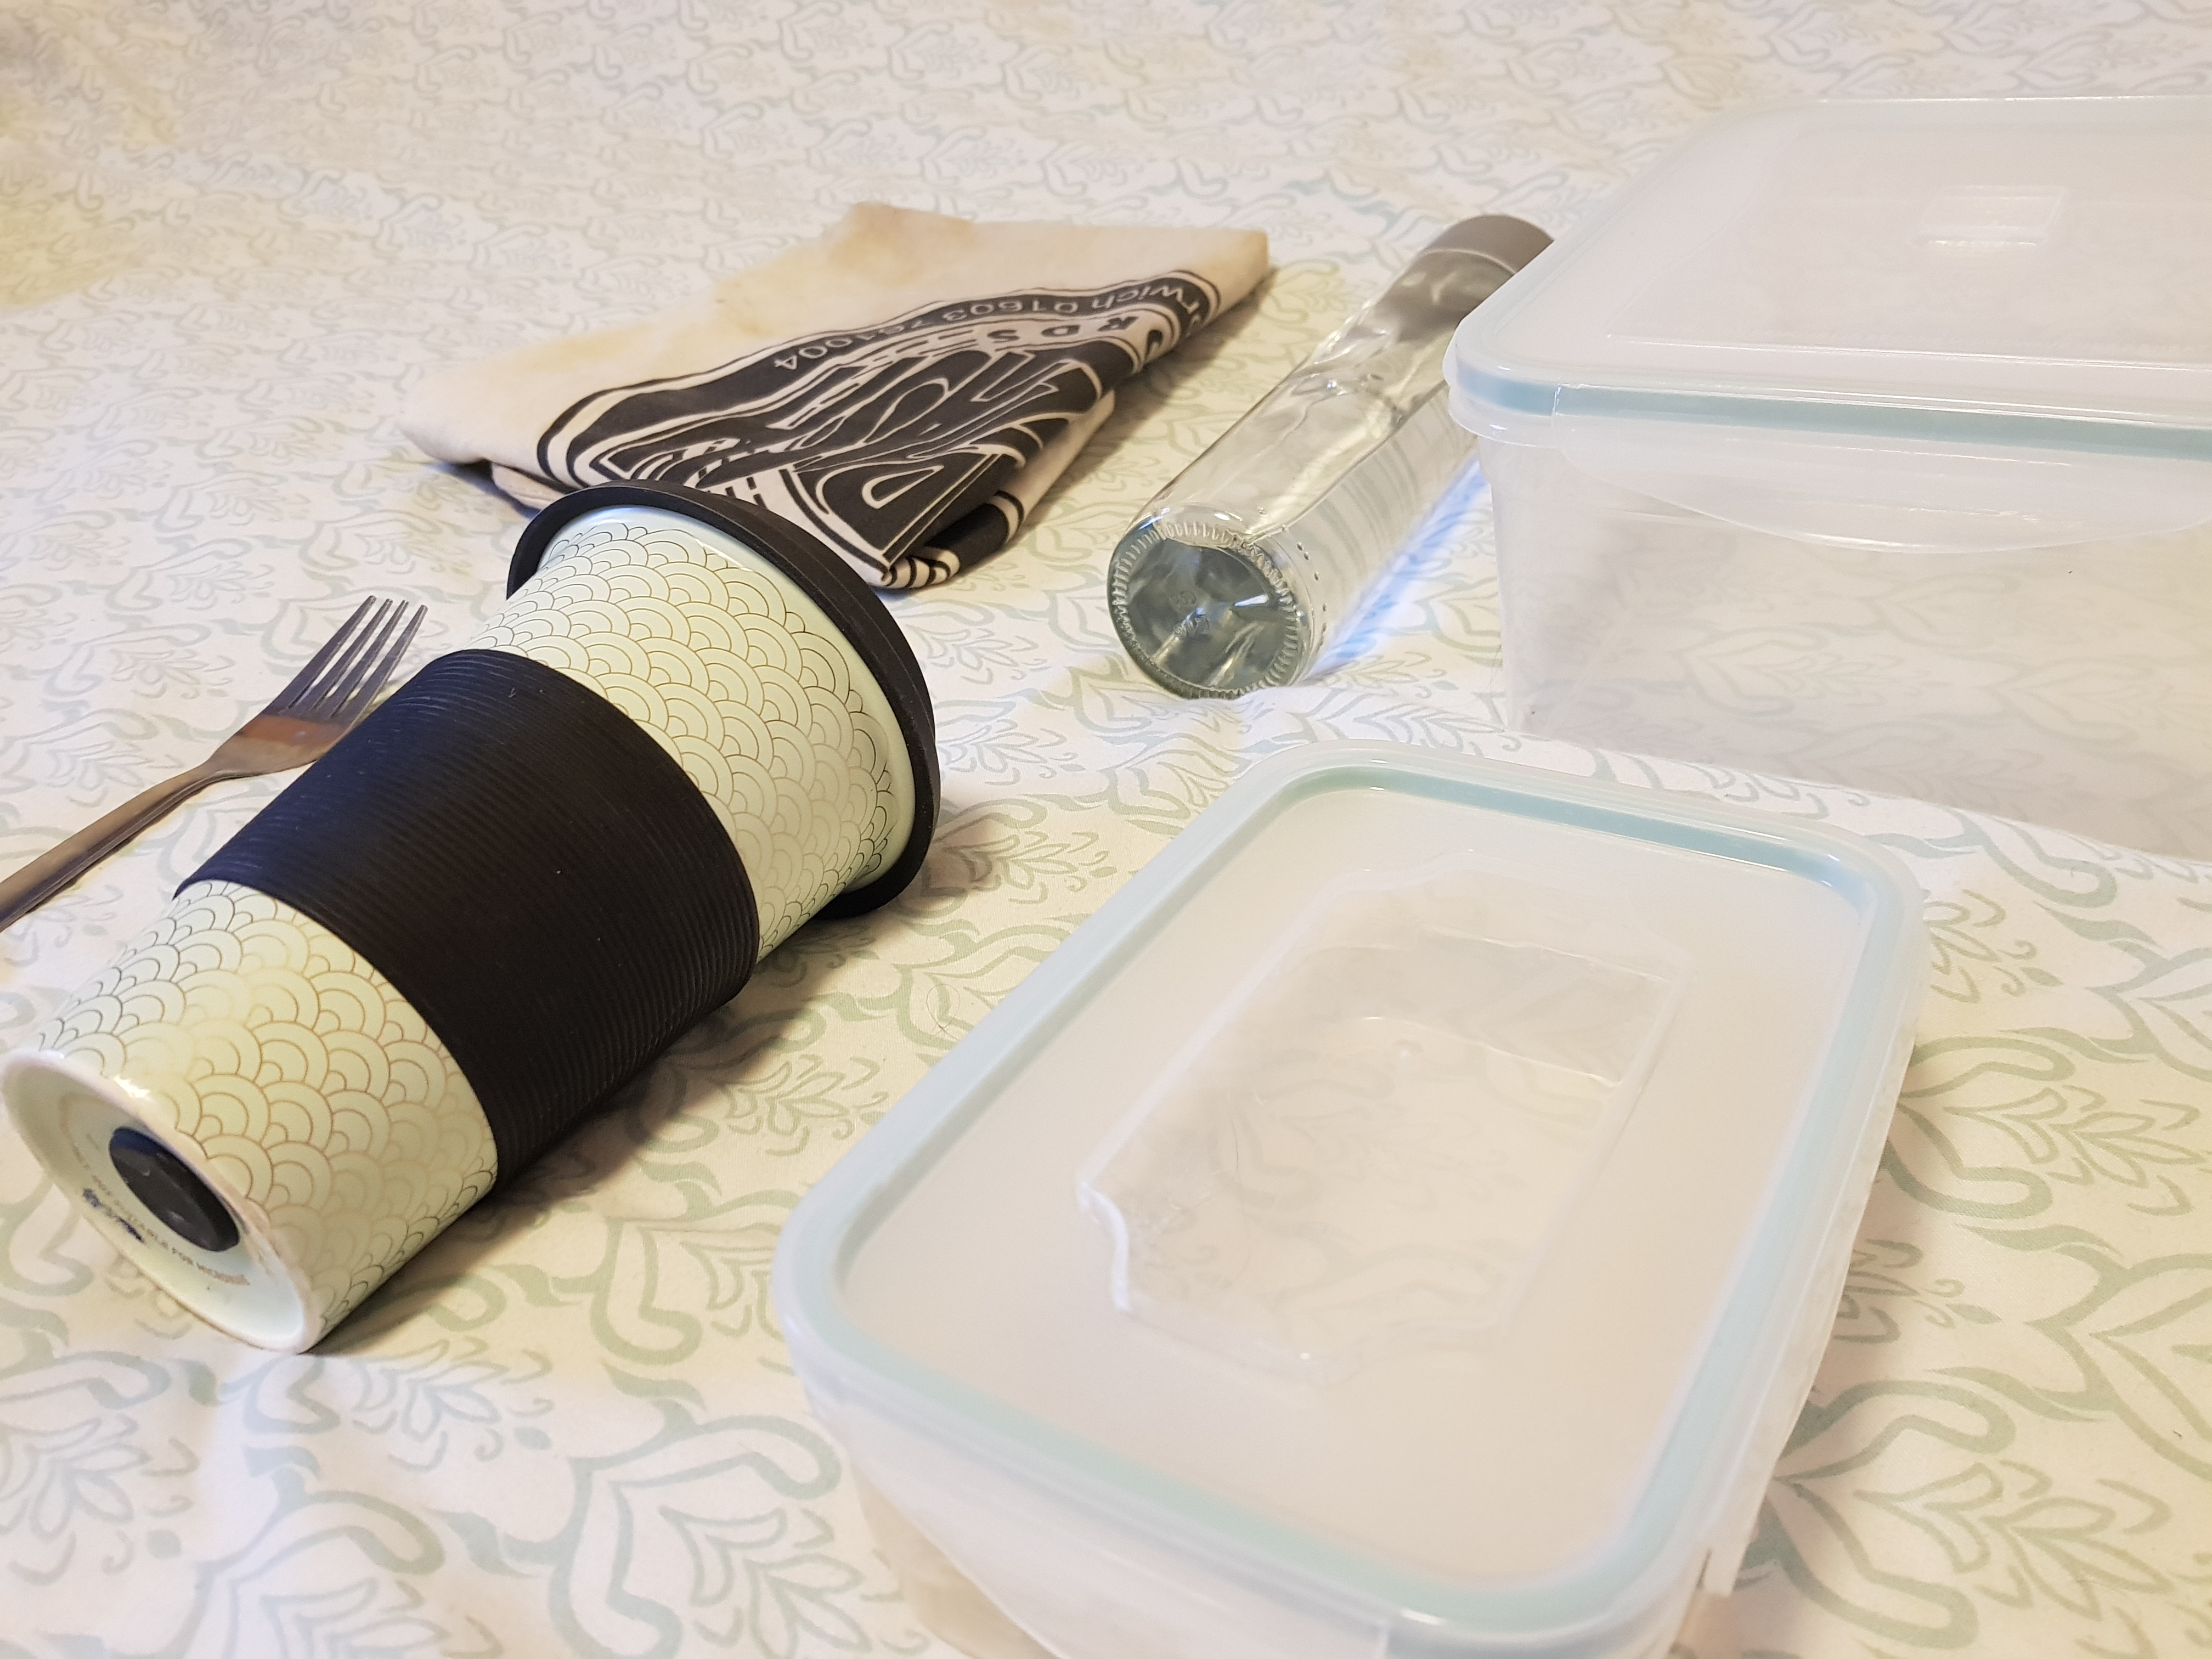 Here's a selection of products you could use to reduce the amount of plastic you're using! 
Photo: Leanne Etheridge